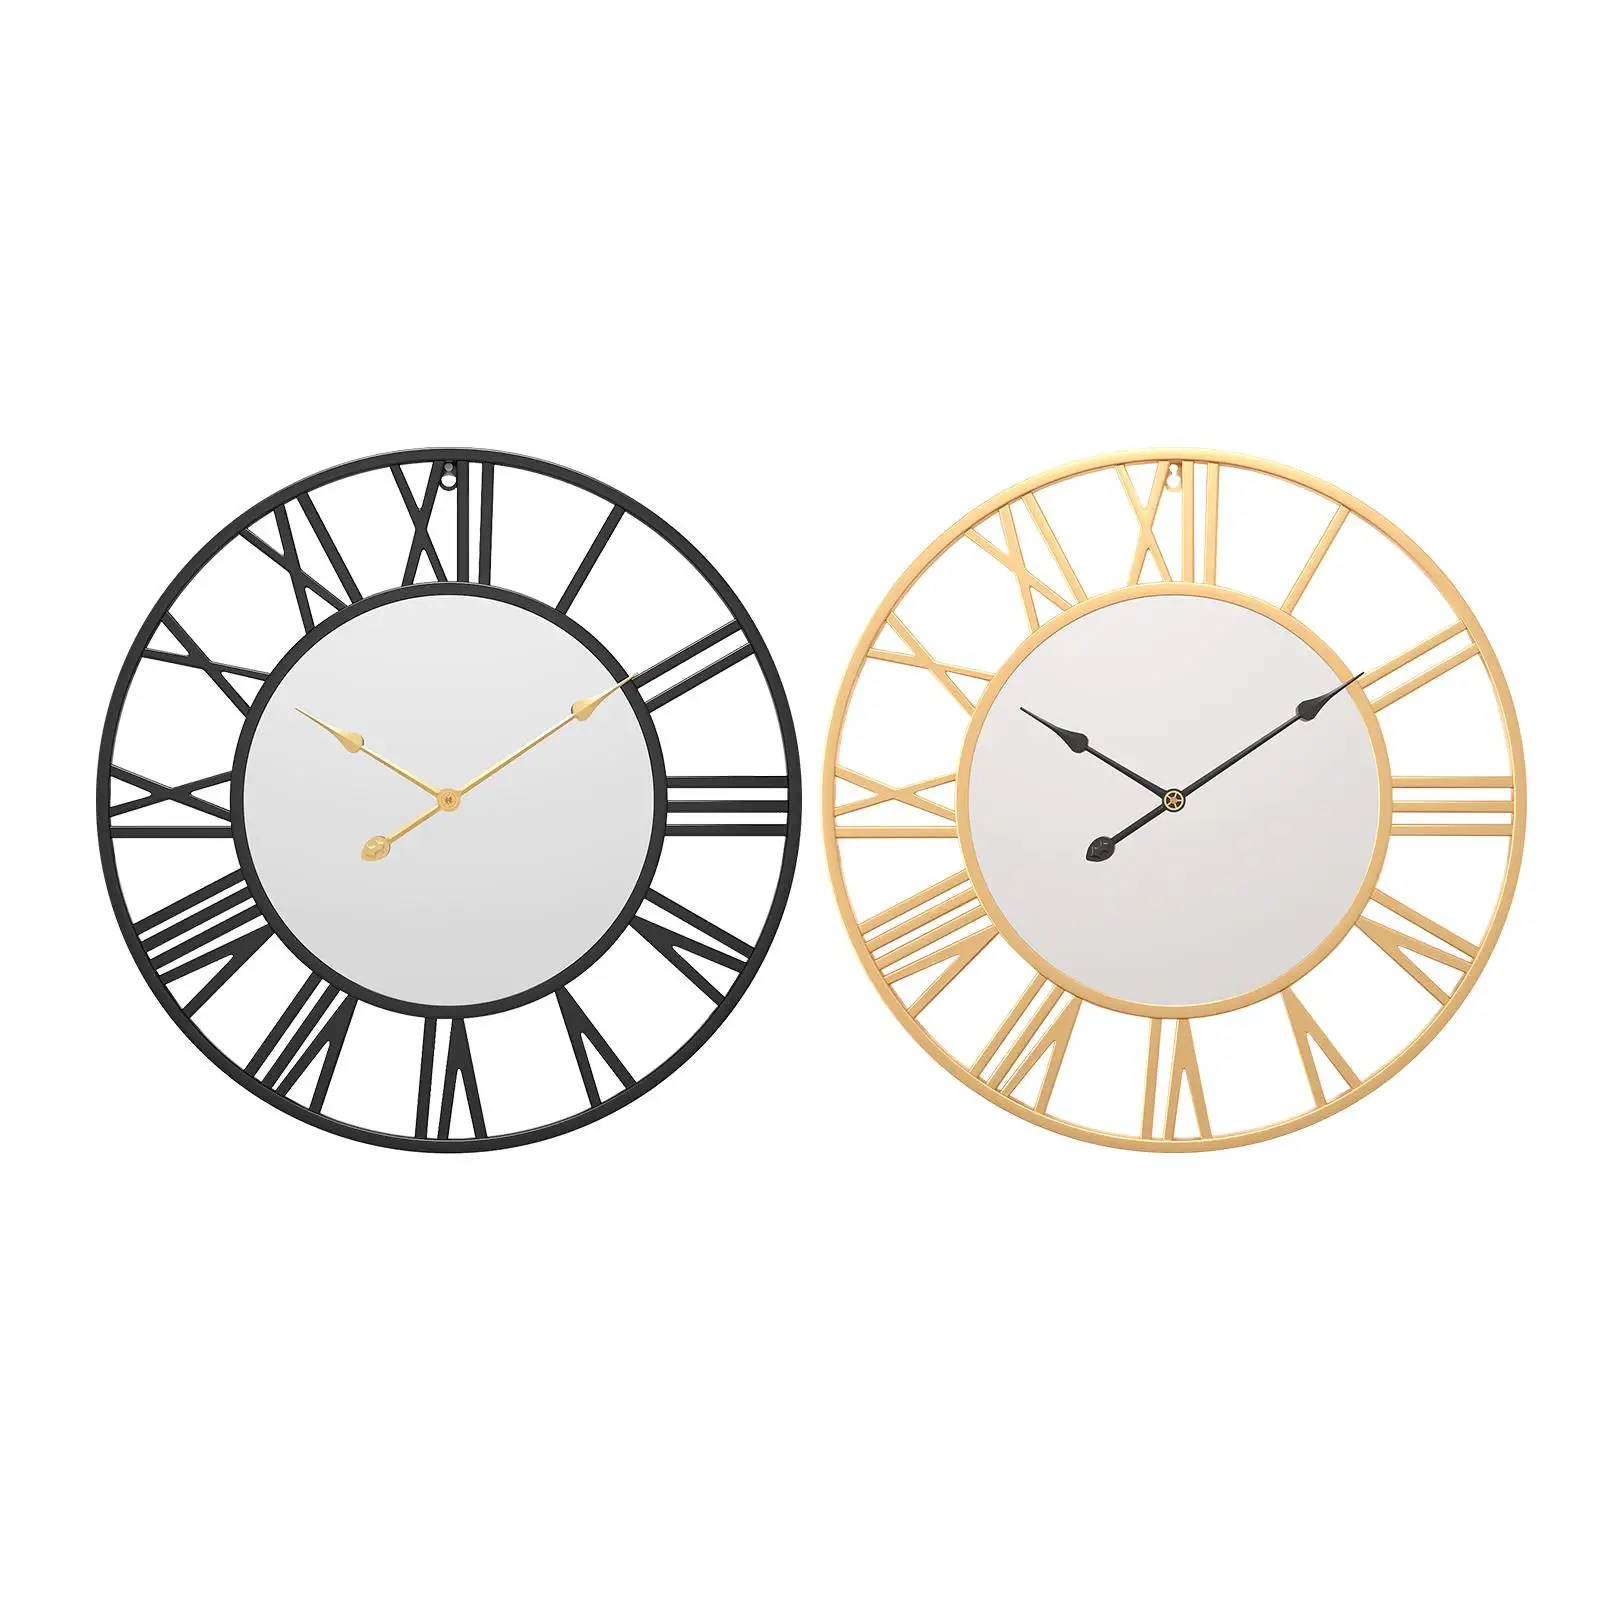 Silent Hanging Clock Ornament Roman Numerals 12H Display Round for Bedroom Restaurants Cafes Bathroom Adults Kids